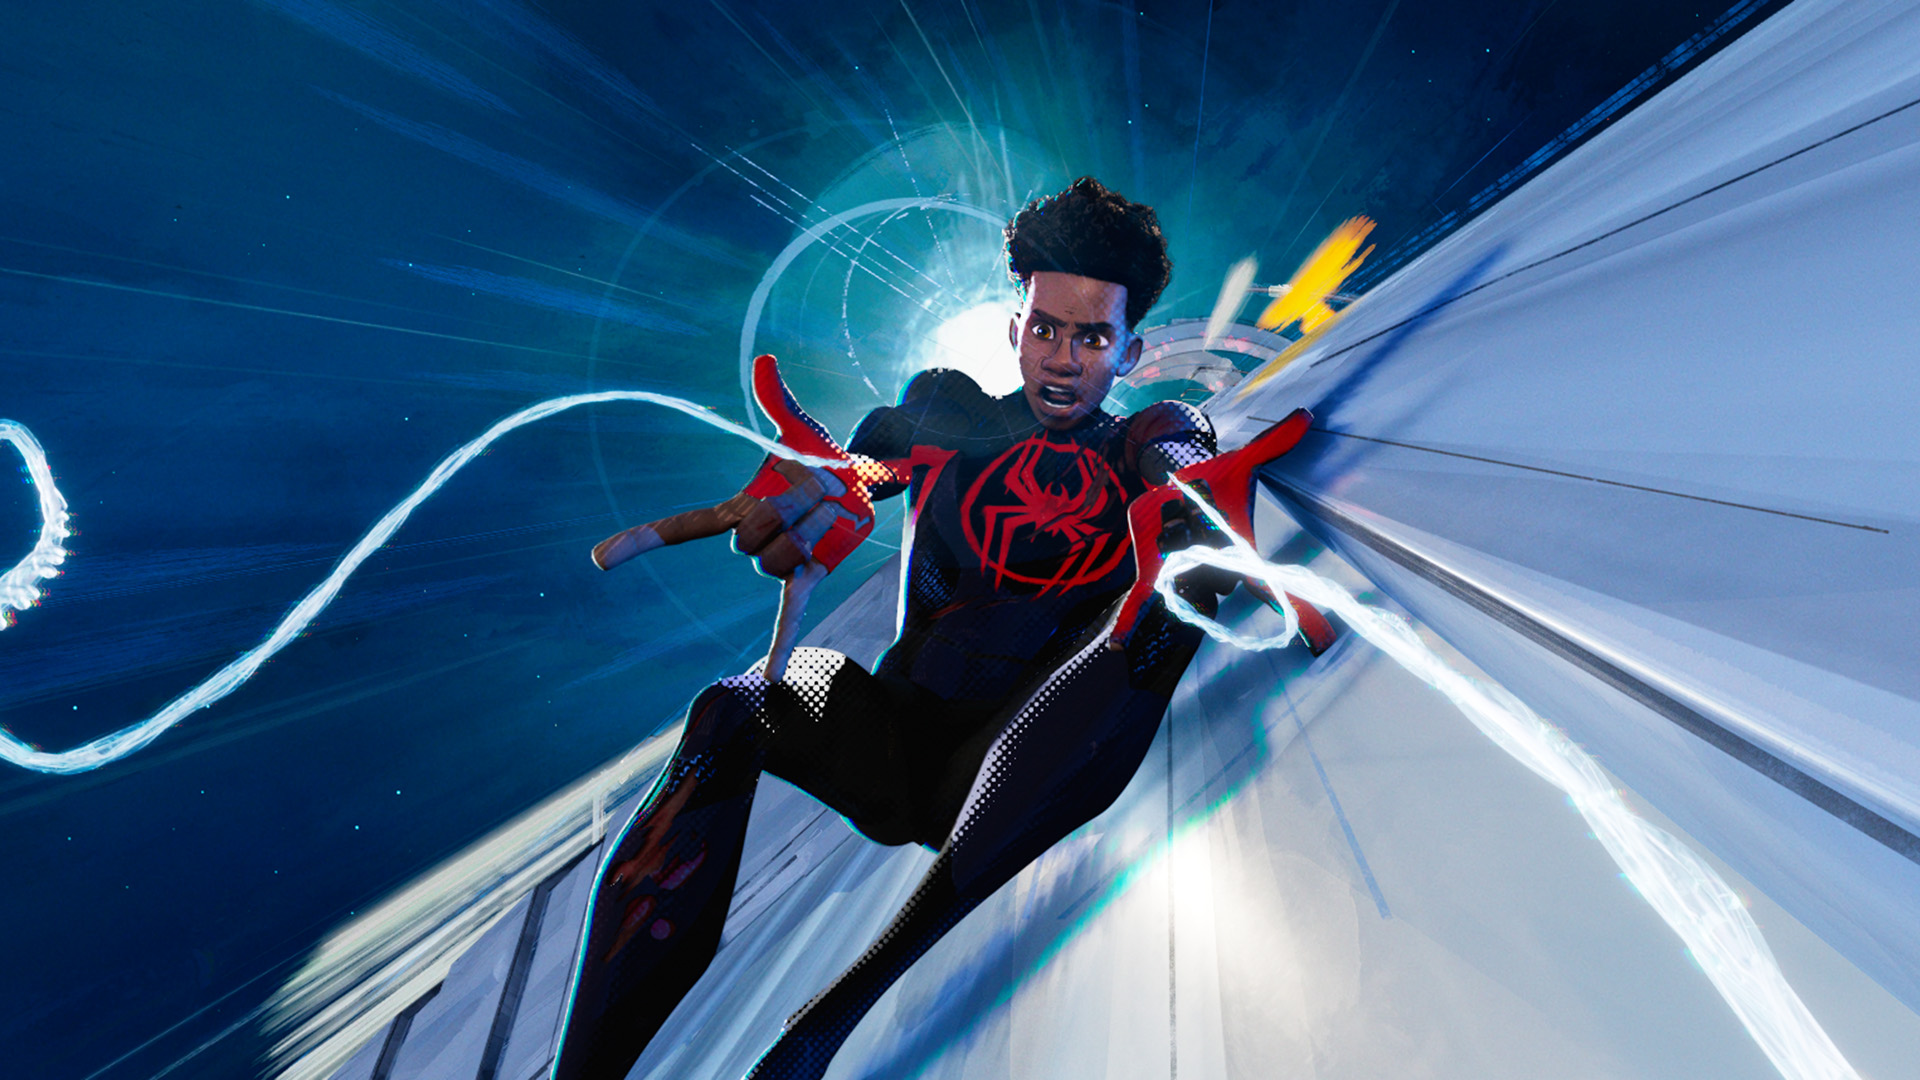 Miles Morales fires up his webshooters in Spider-Man: Across the Spider-Verse